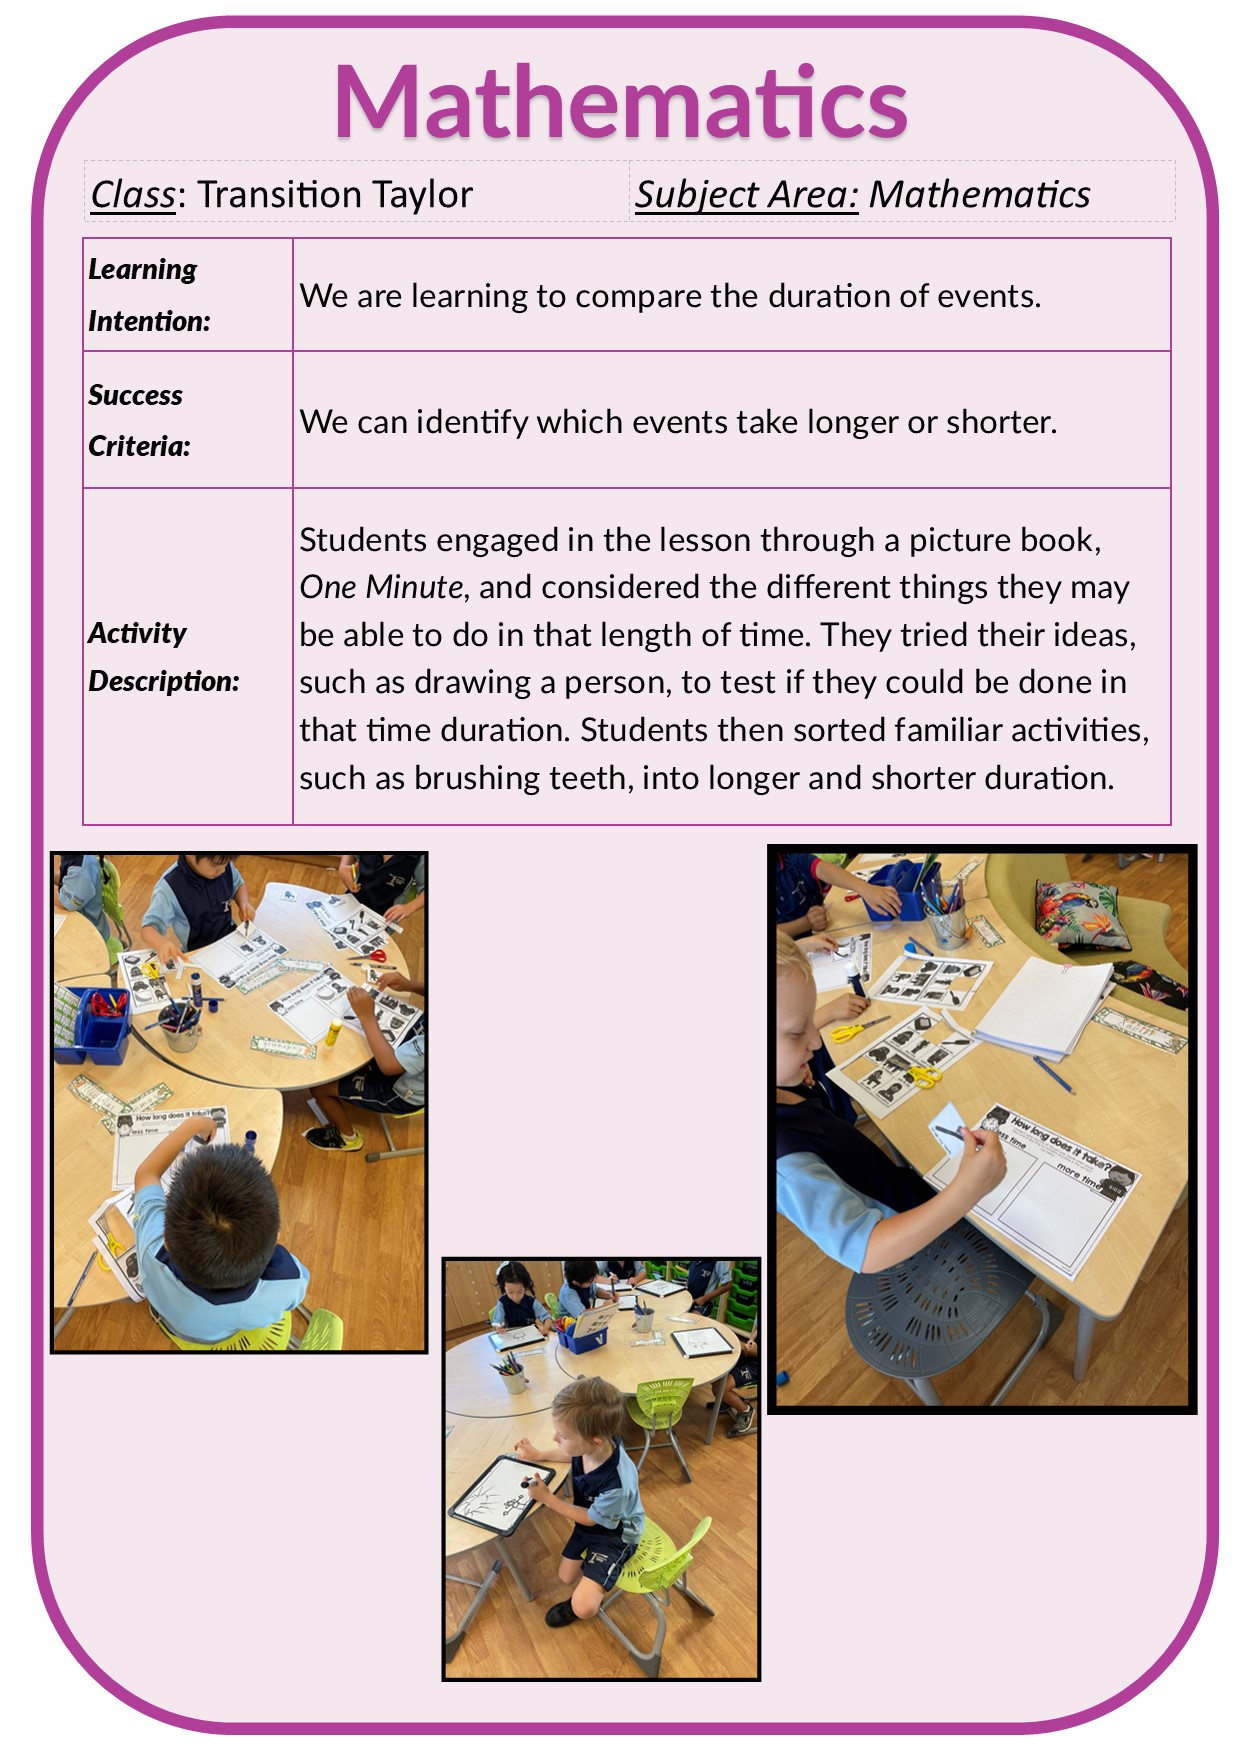 Visible Learning/T Taylor Maths T4 Week 6.jpg